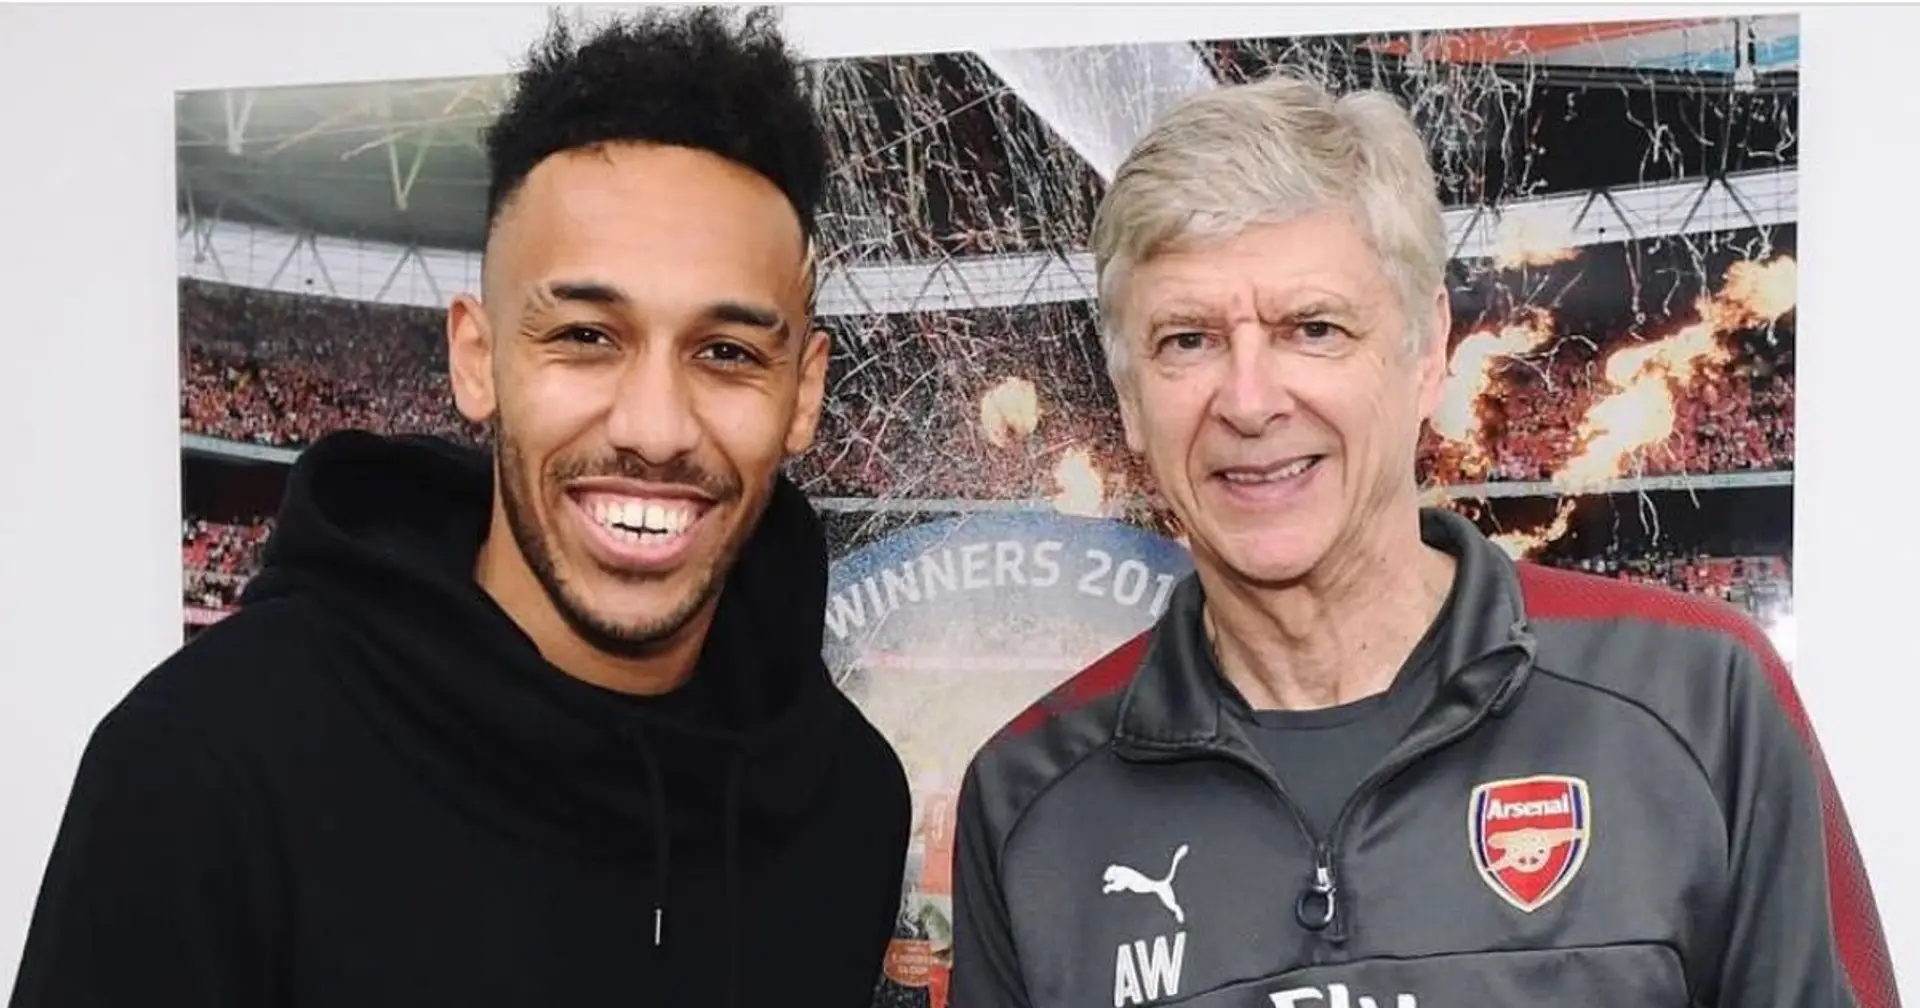 'It was a shame that I did not get the chance to get to know him more': Auba on playing under Wenger